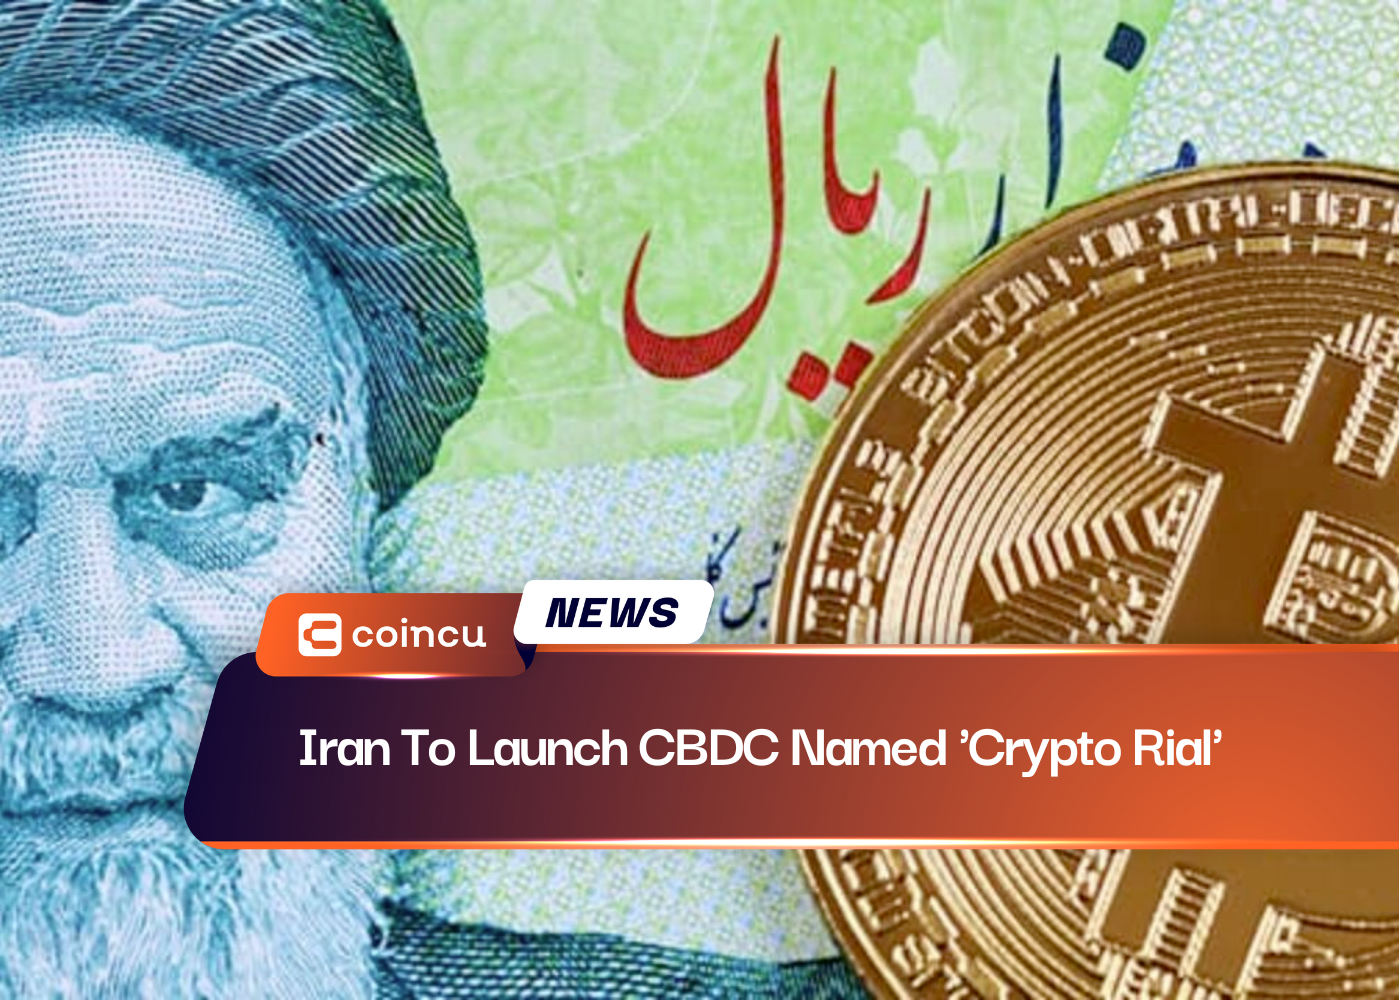 Iran To Launch CBDC Named 'Crypto Rial'